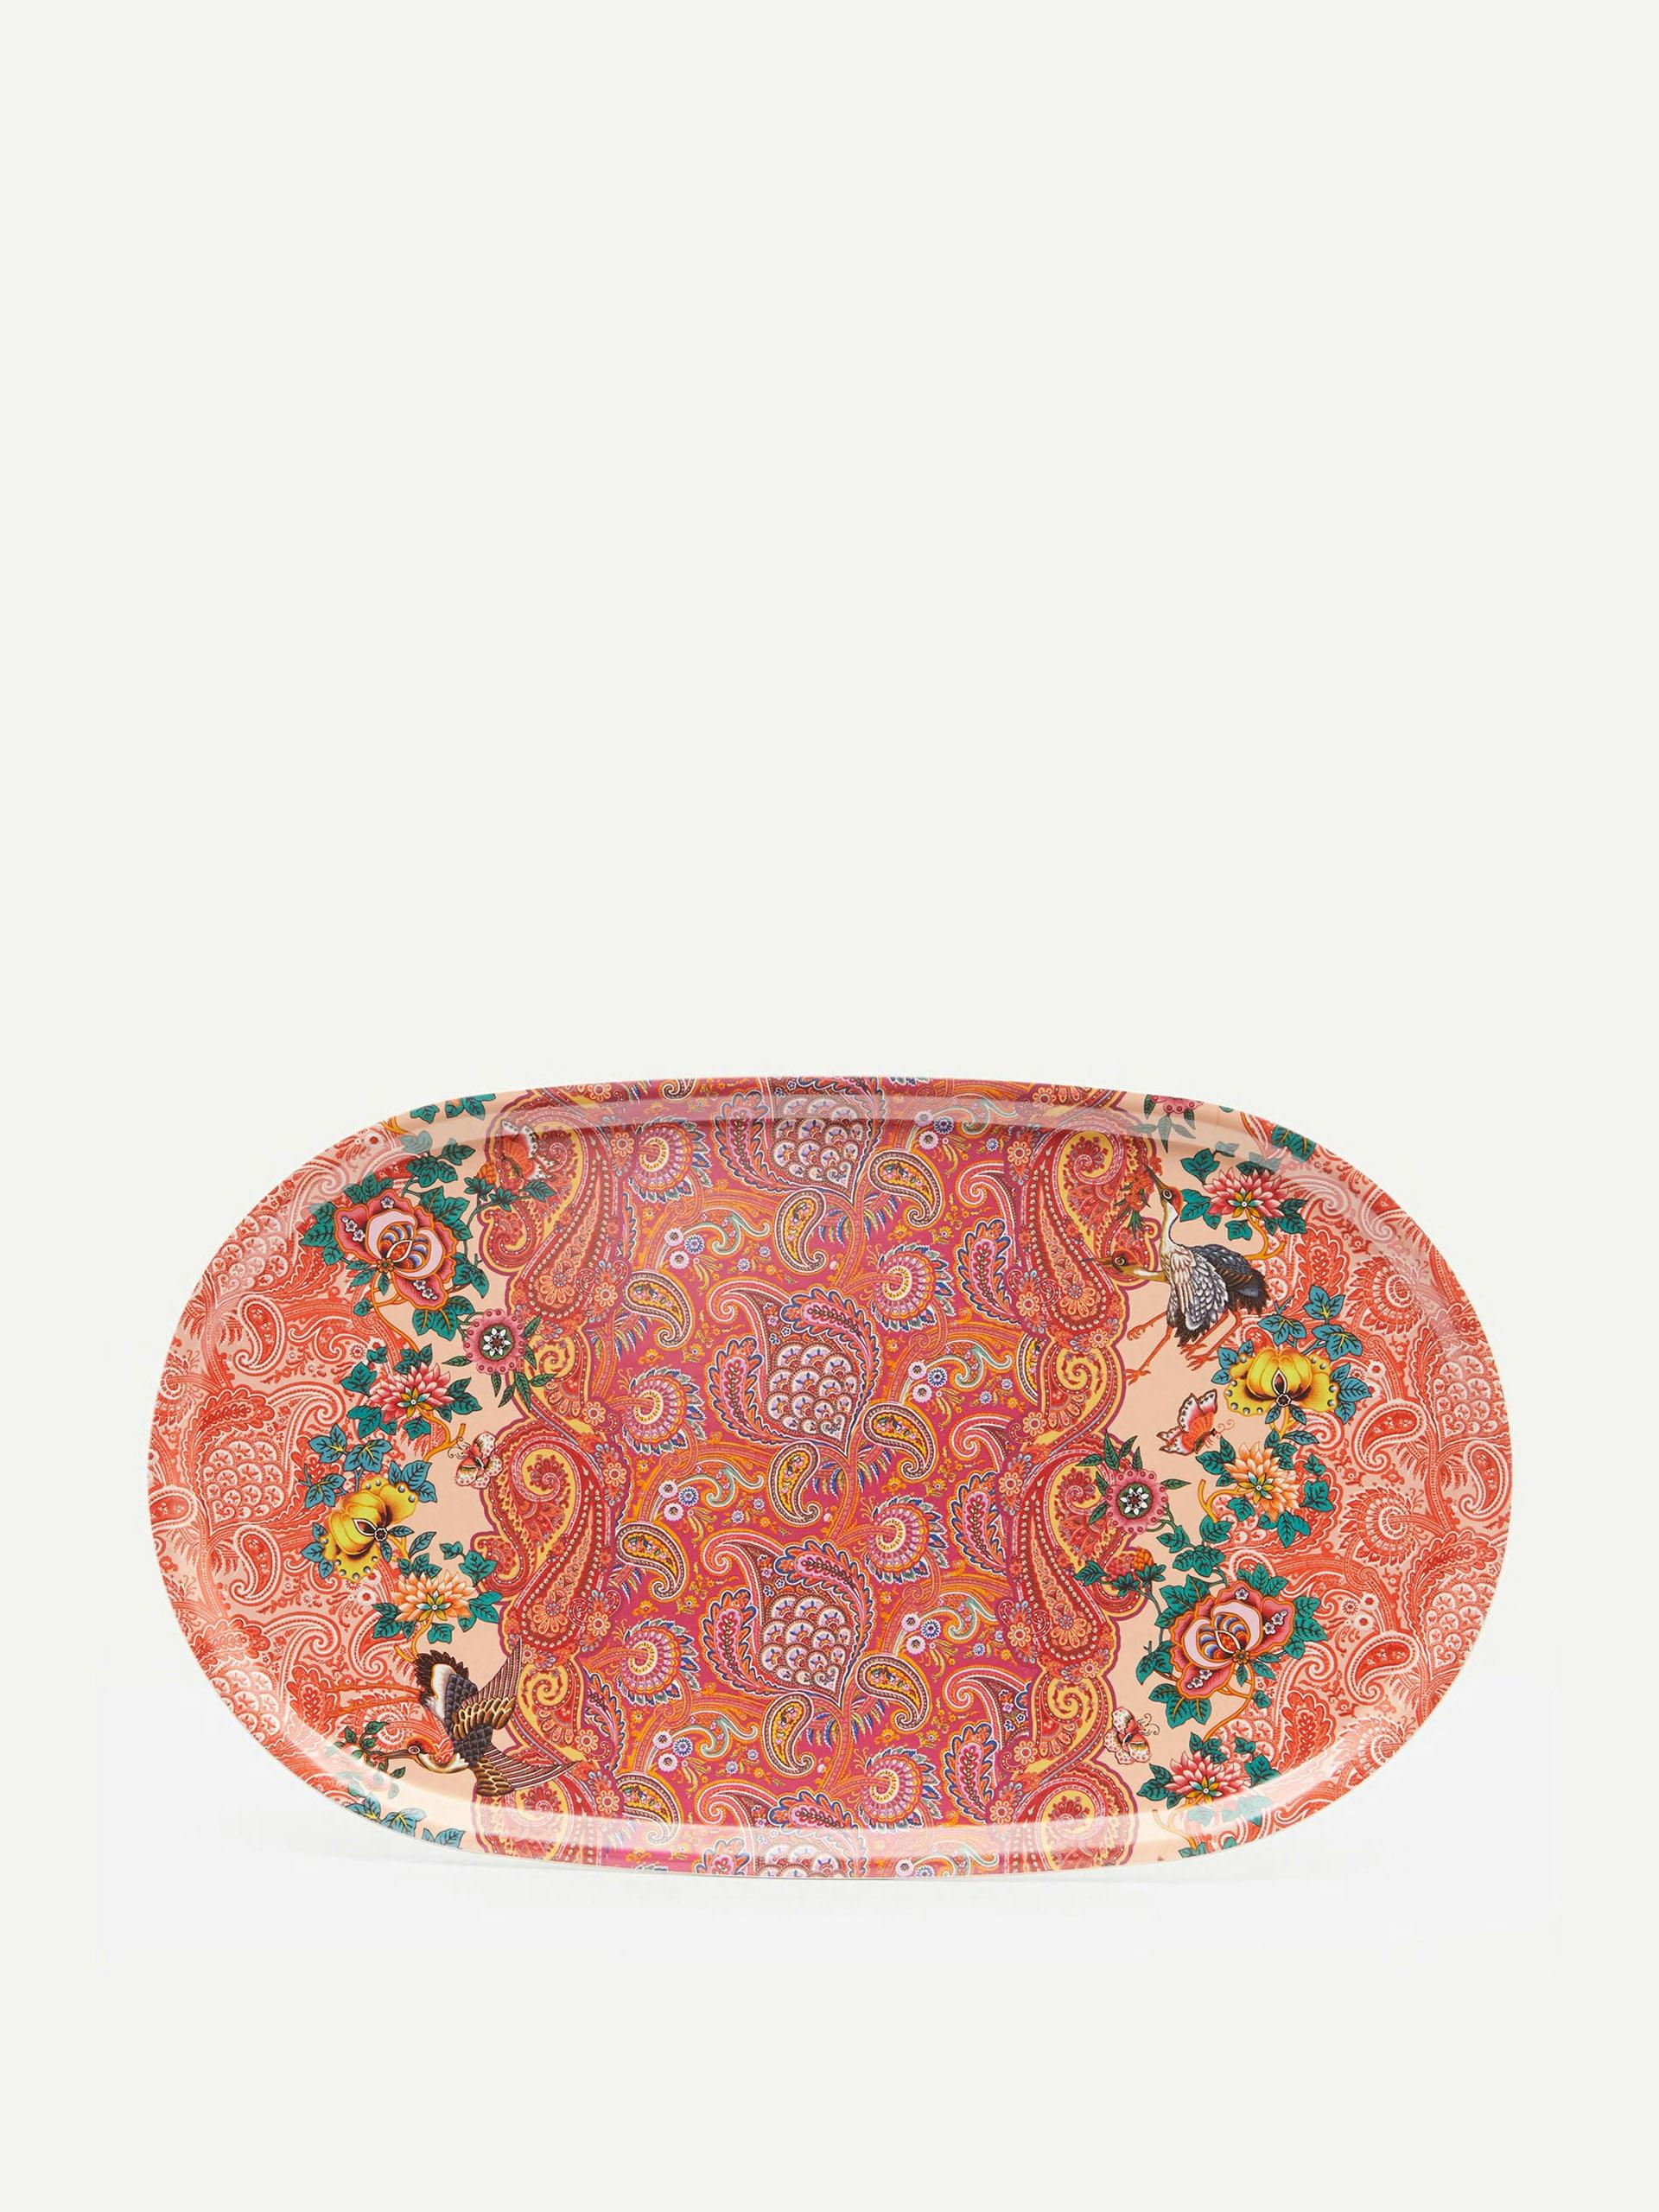 Orange paisley floral oval tray